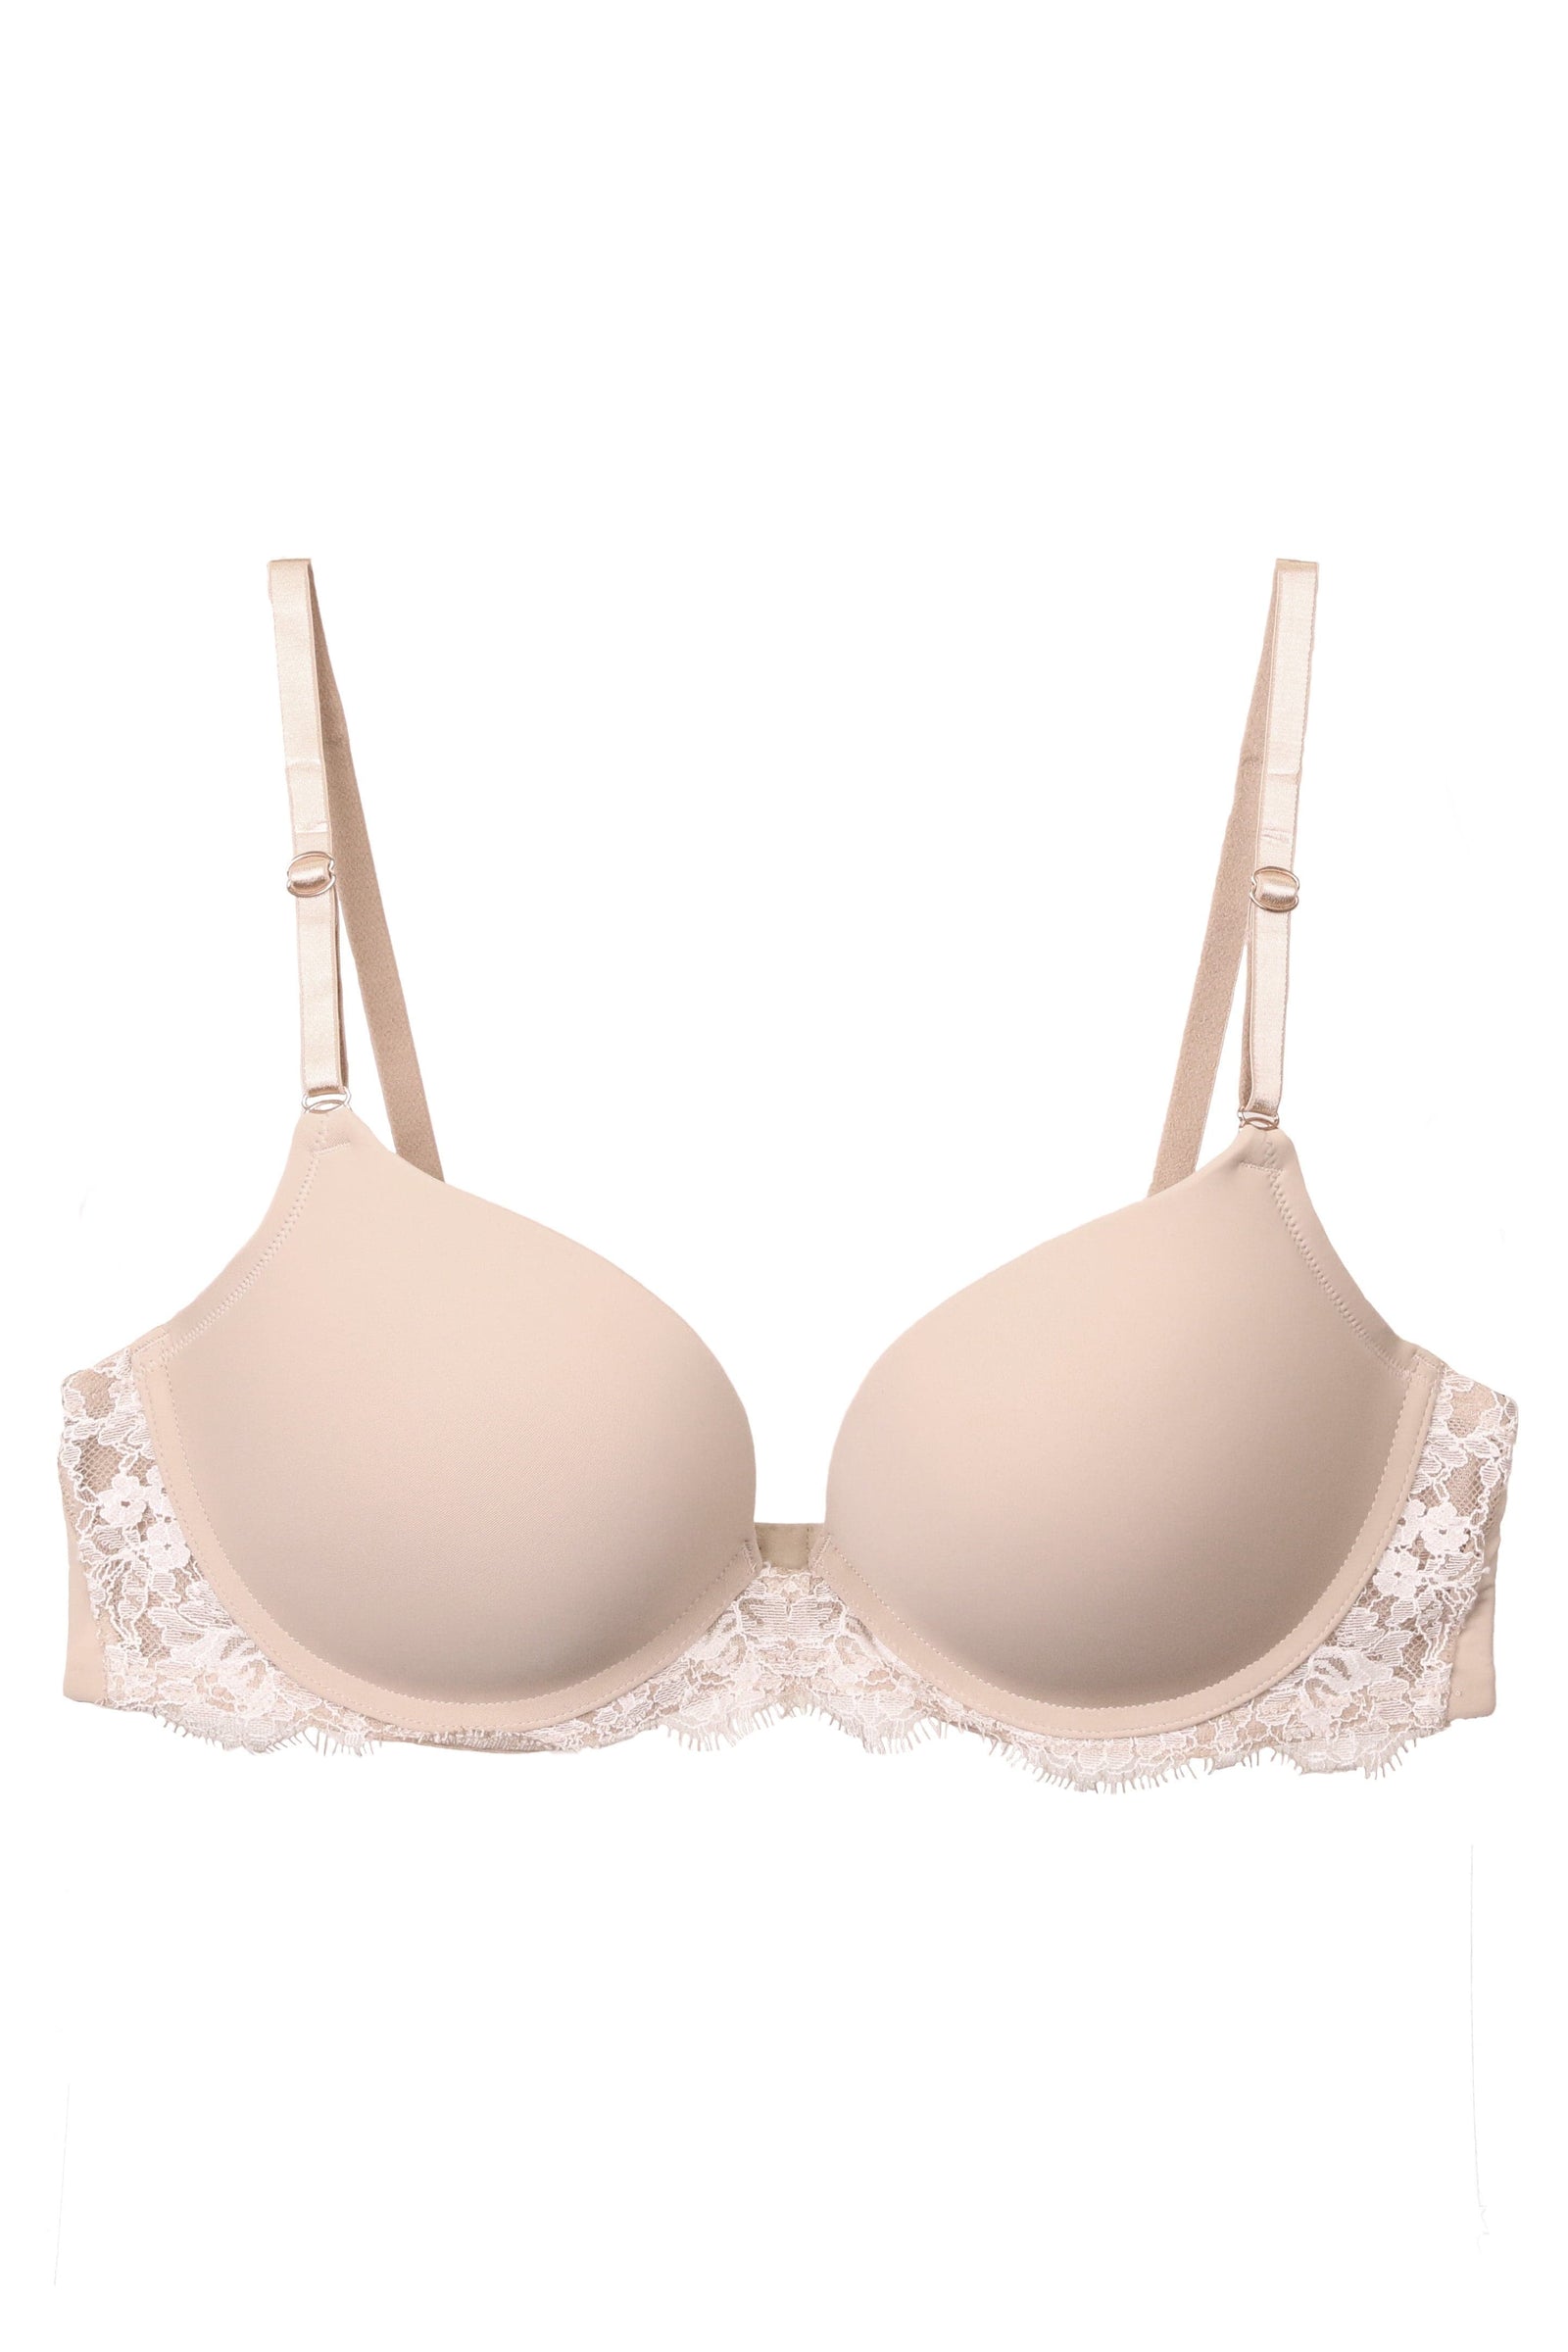 Glossie's Lace Sheer Bra - Chérie Amour